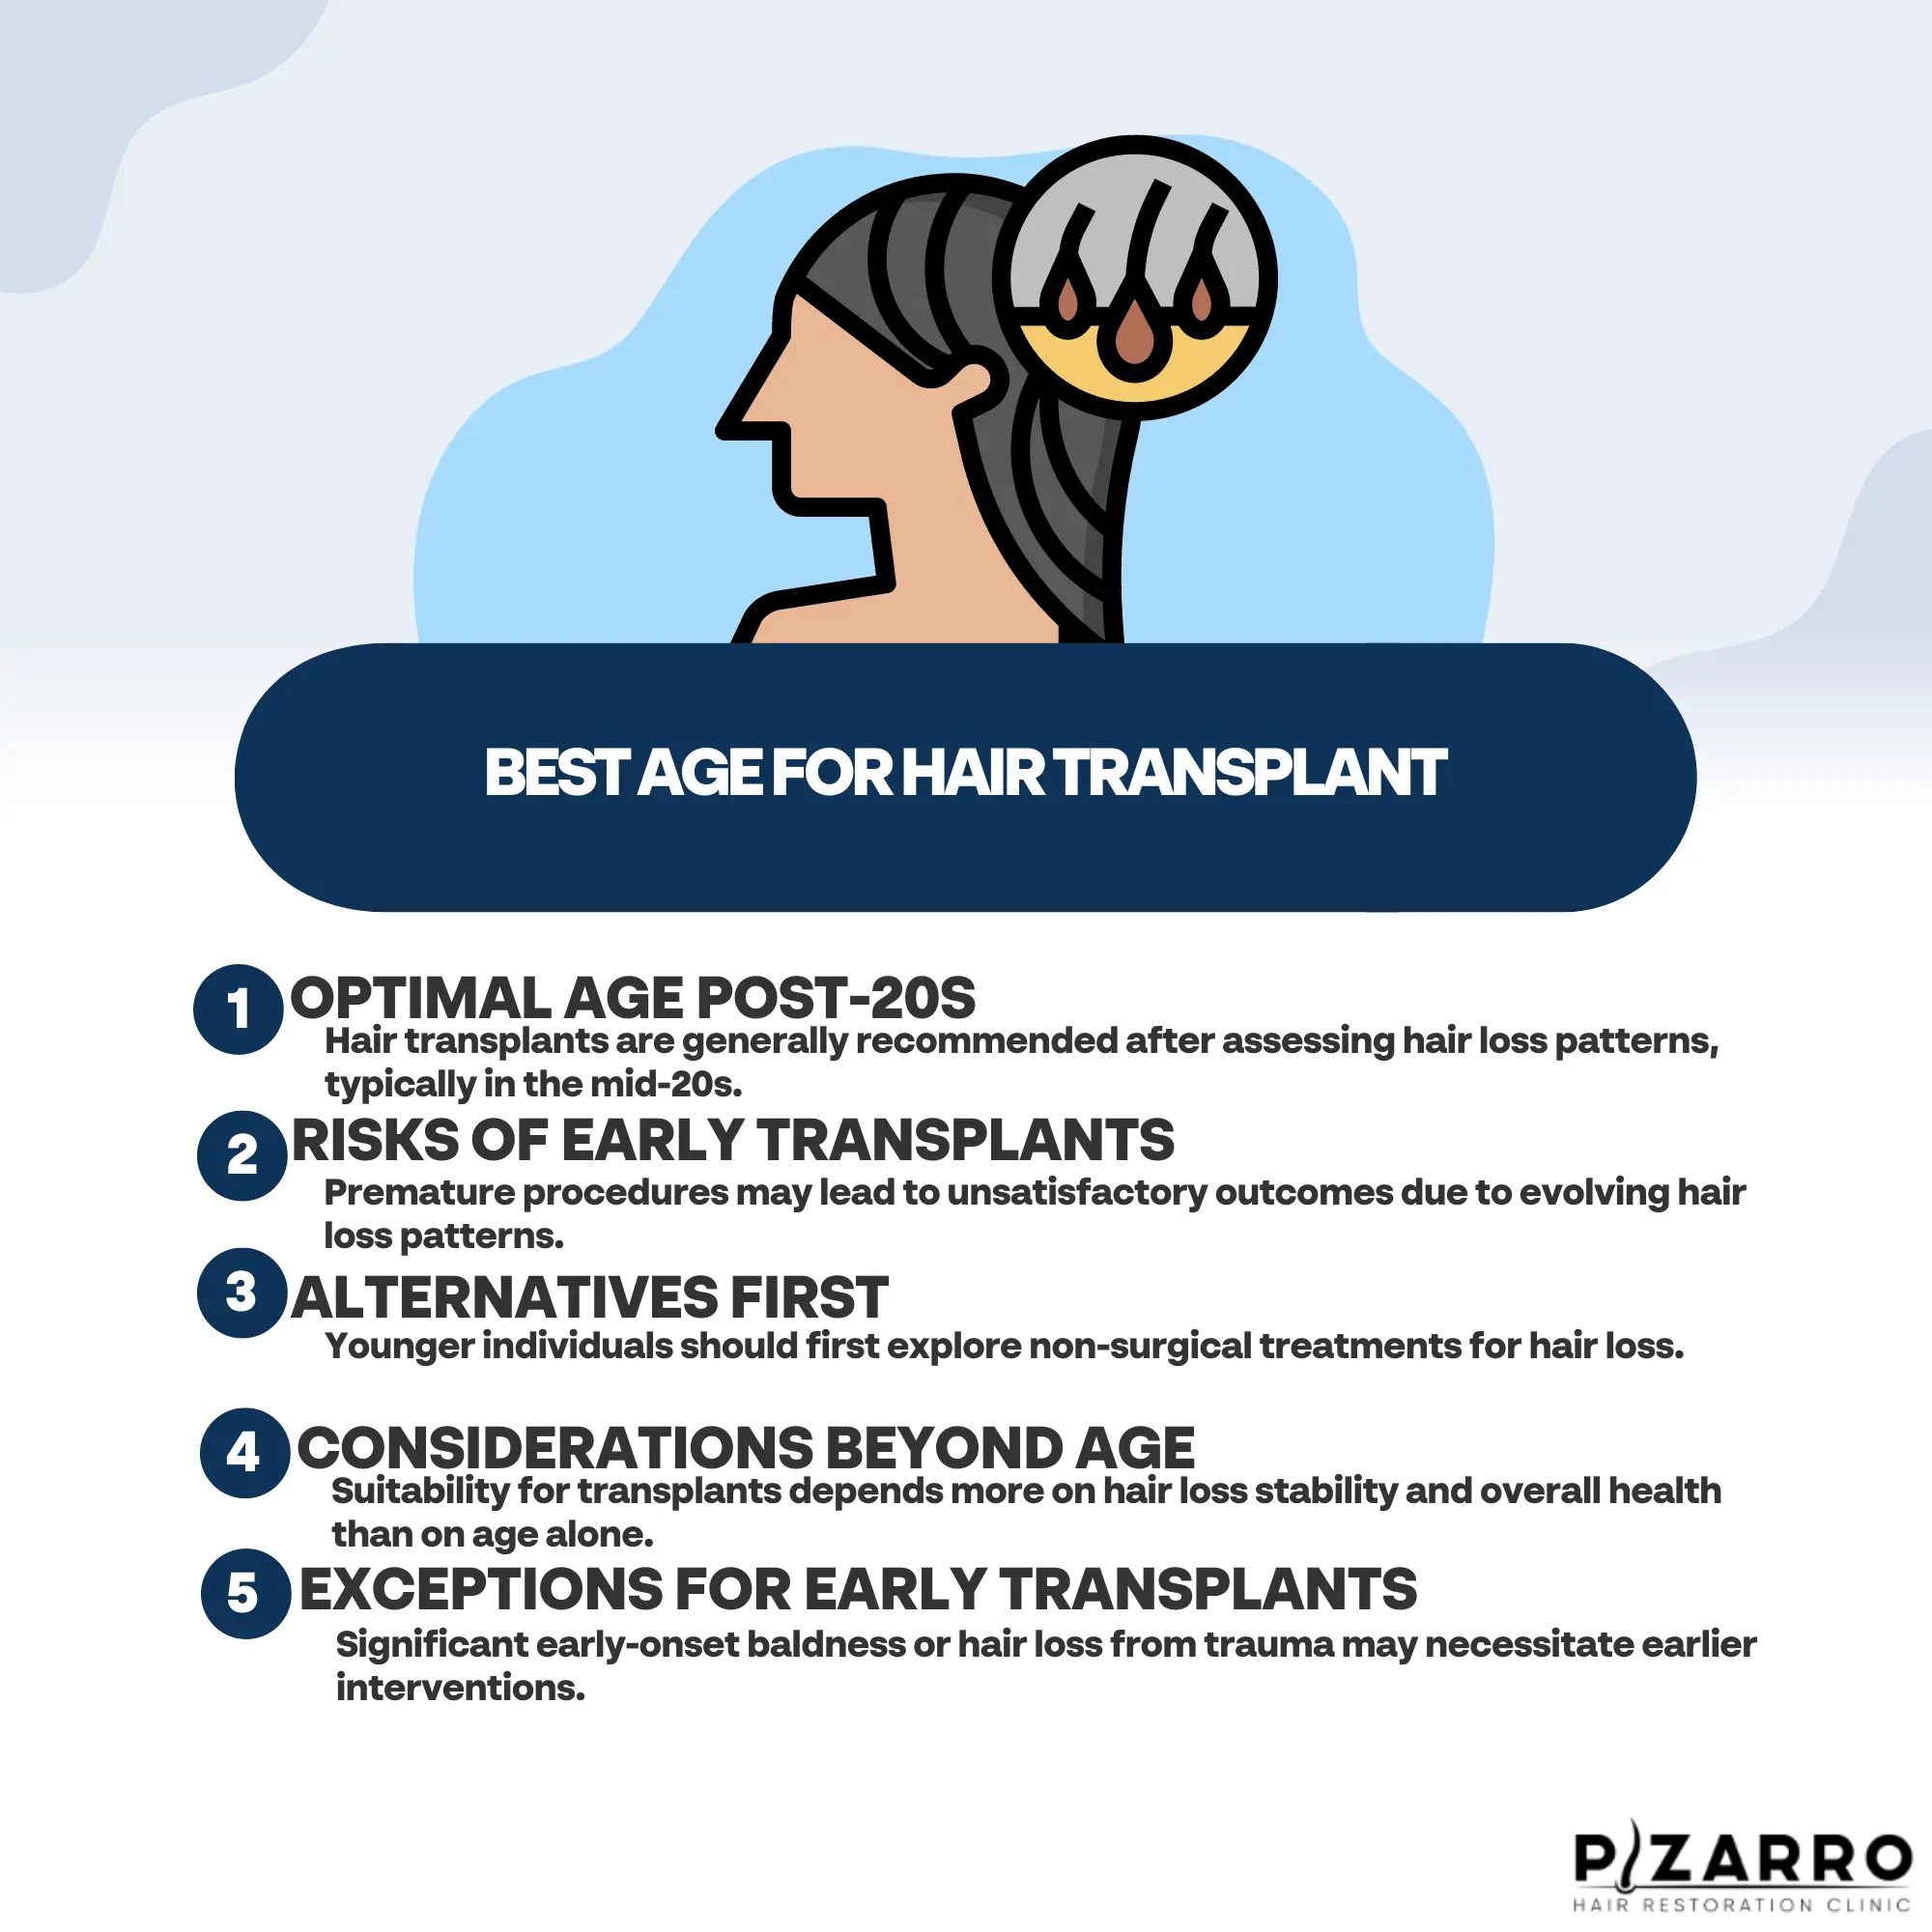 The Best Age for Hair Transplant: A Comprehensive Guide